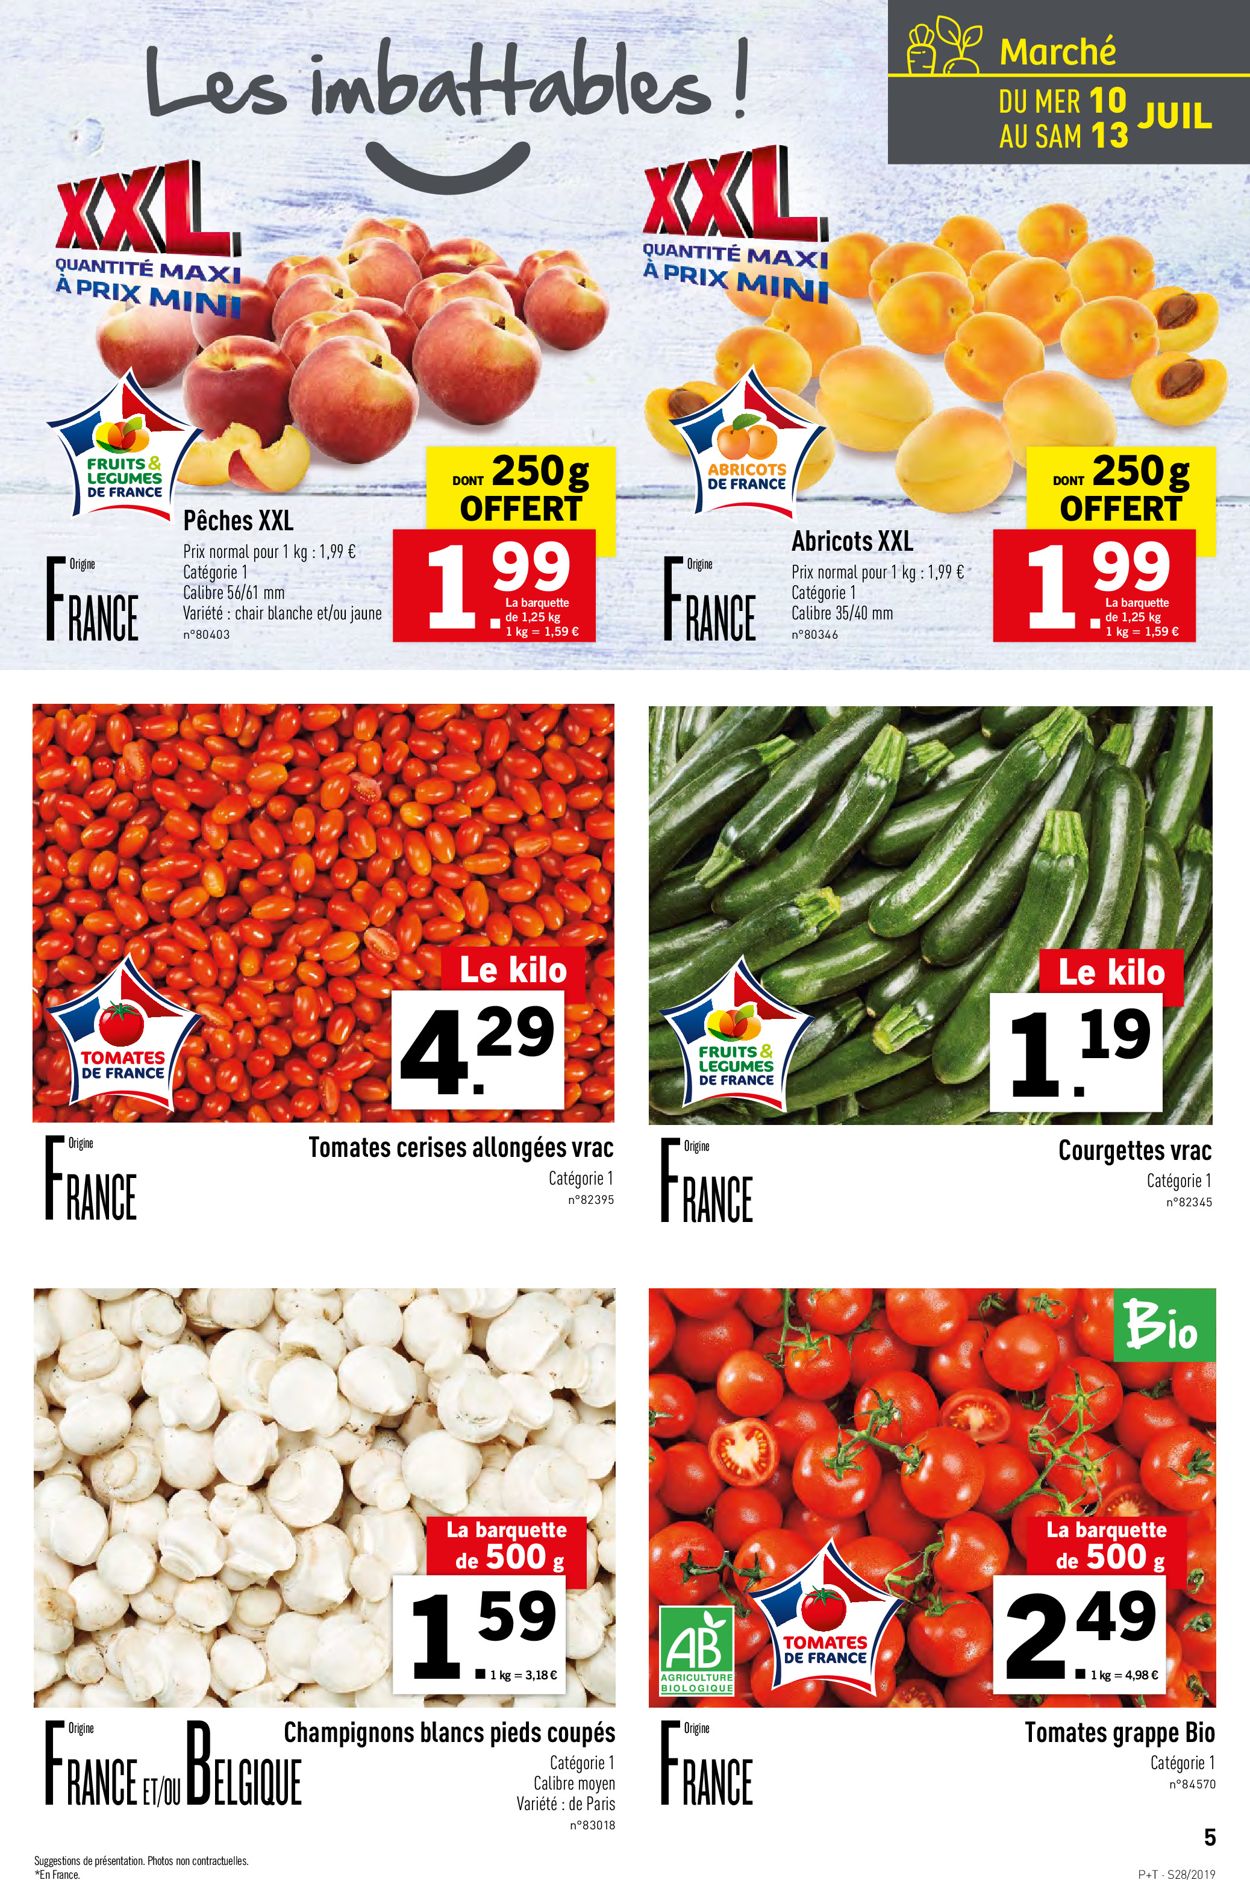 Lidl Catalogue - 10.07-16.07.2019 (Page 5)